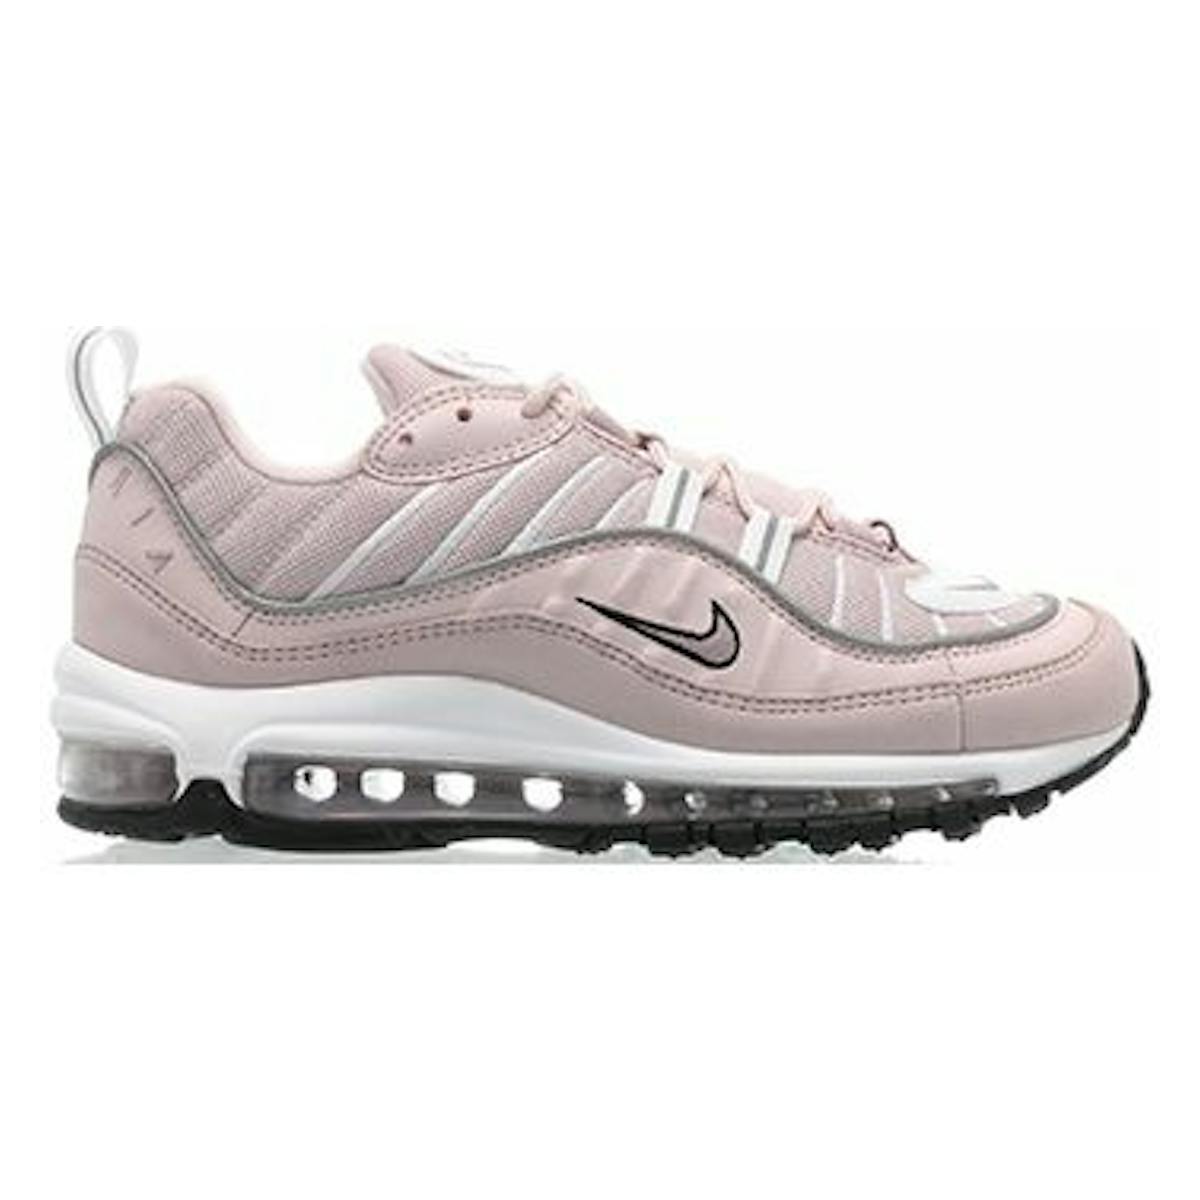 Nike Air Max 98 WMNS Barely Rose